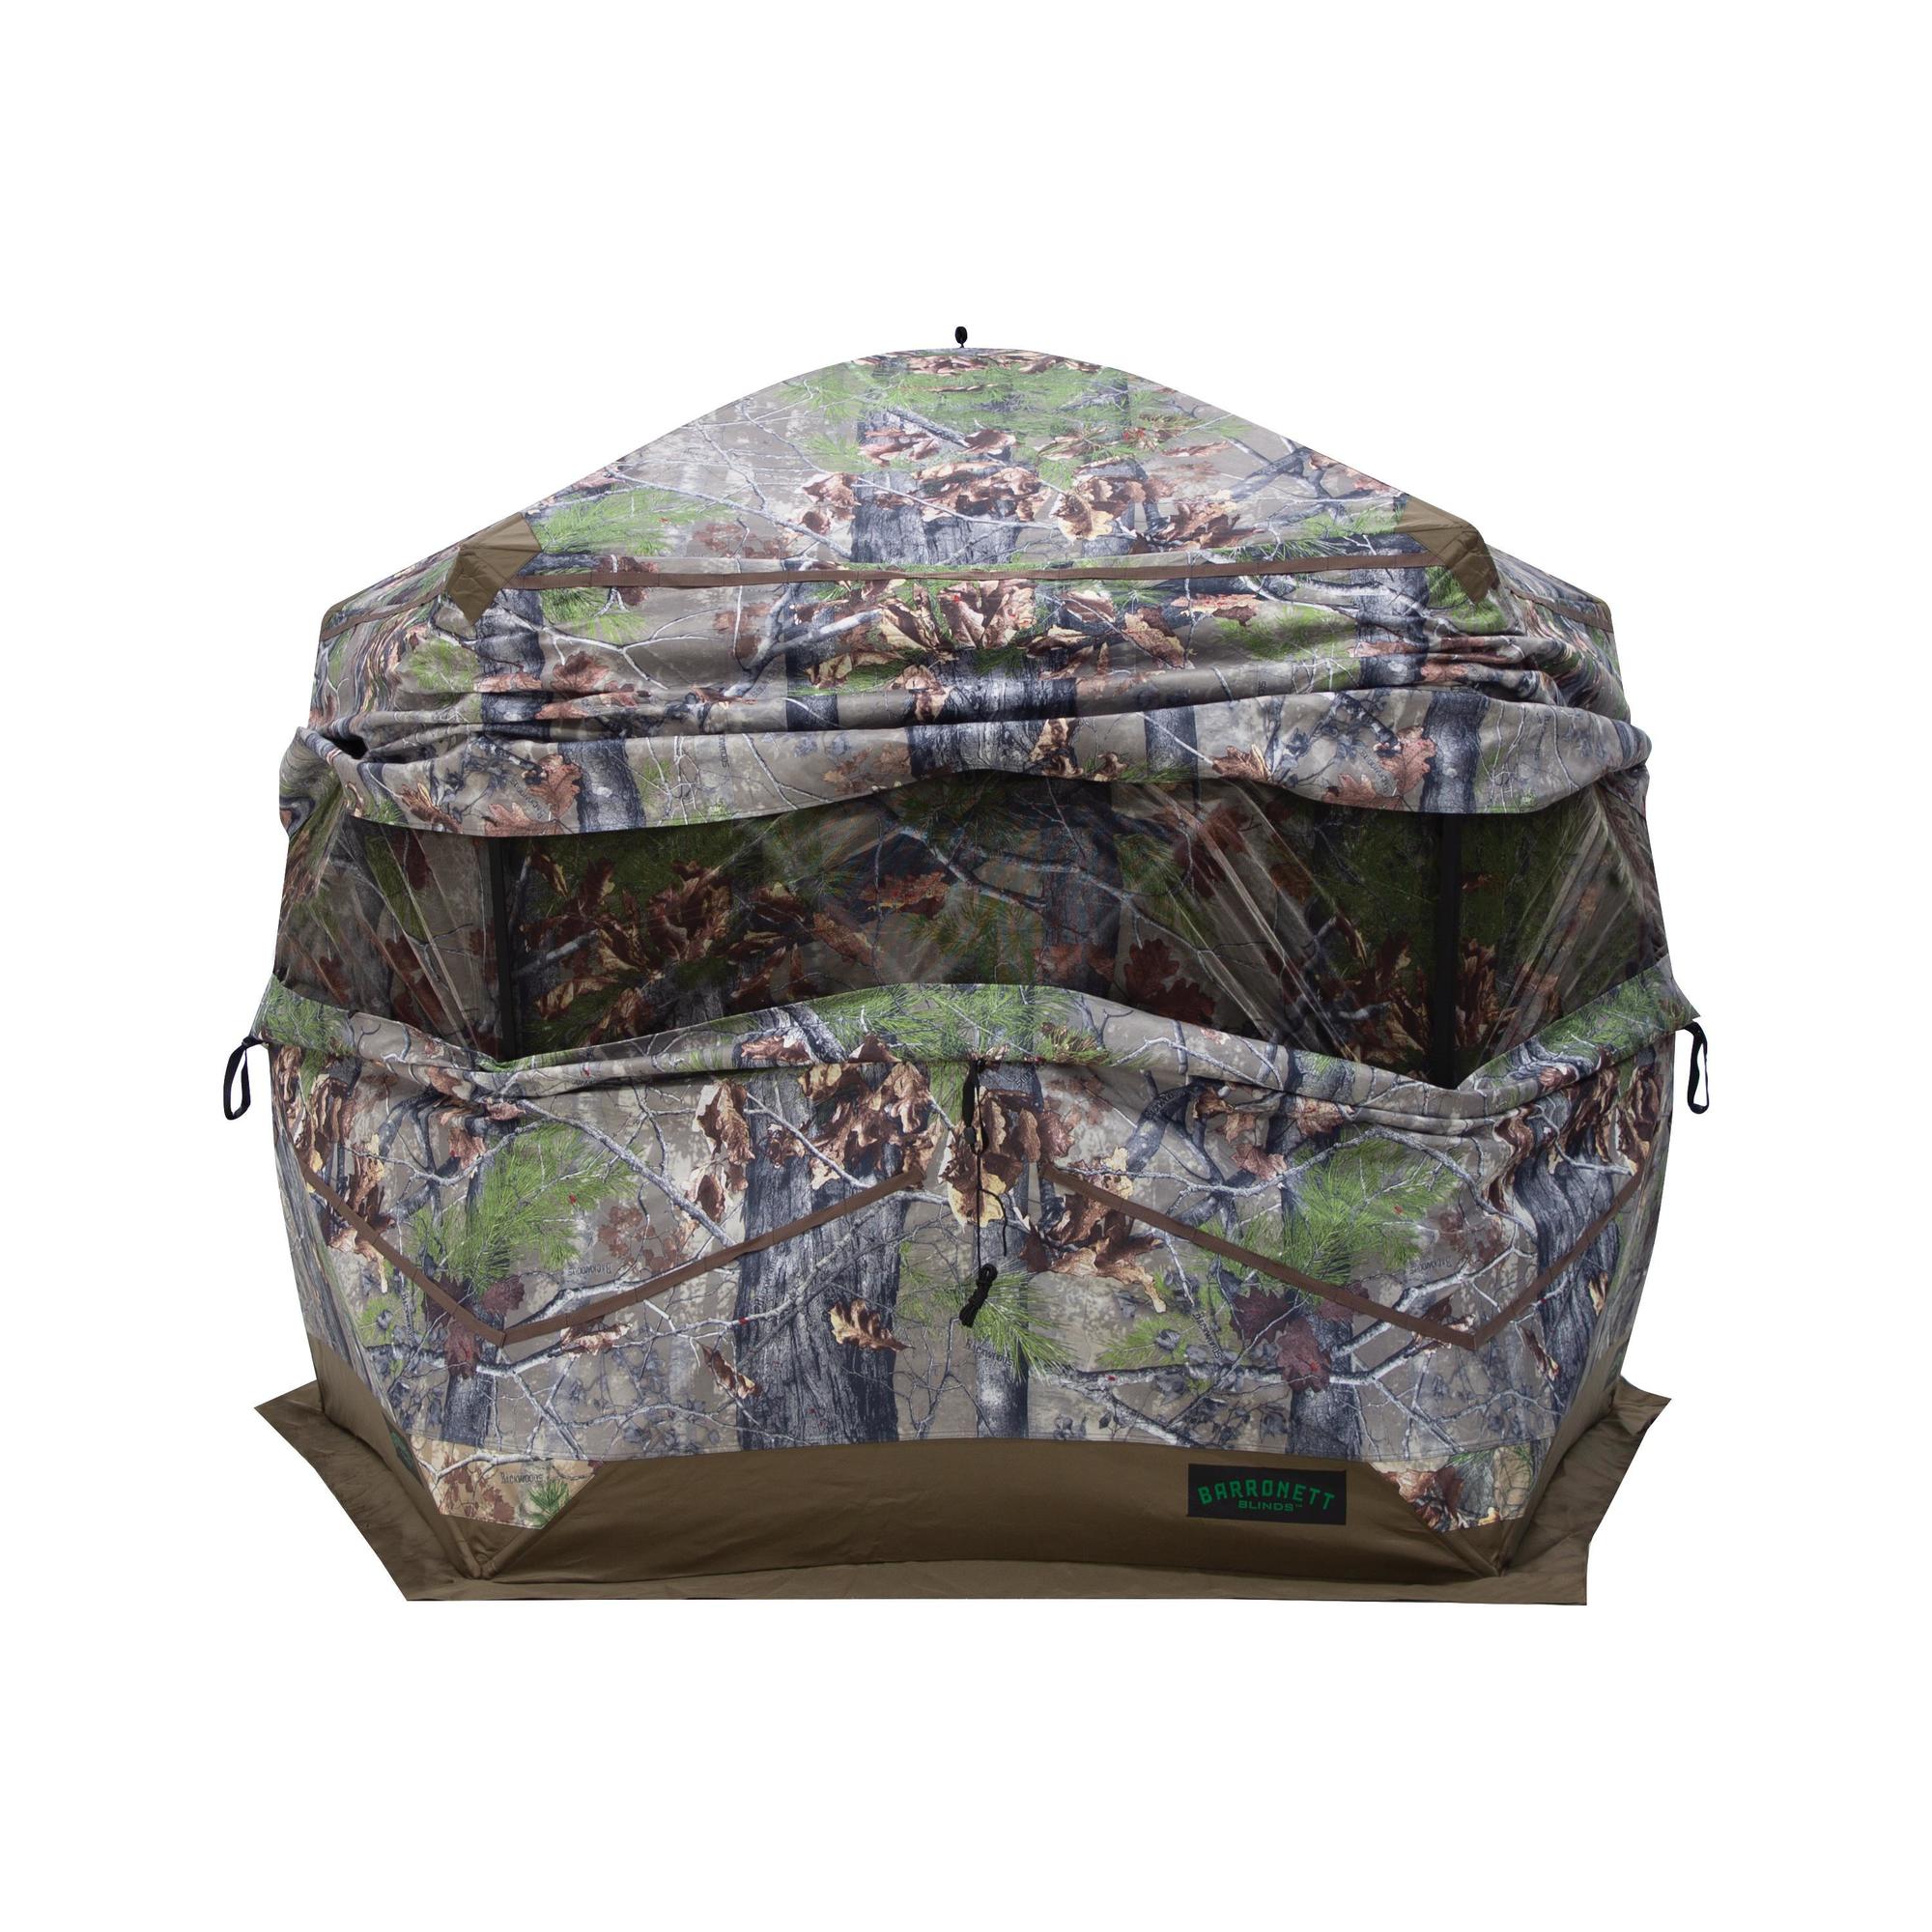 Barronett Blinds, Ox 5 Portable Hunting Blind, 4-Person Capacity, Color Camouflage, Material Polyester, Model BX550BW